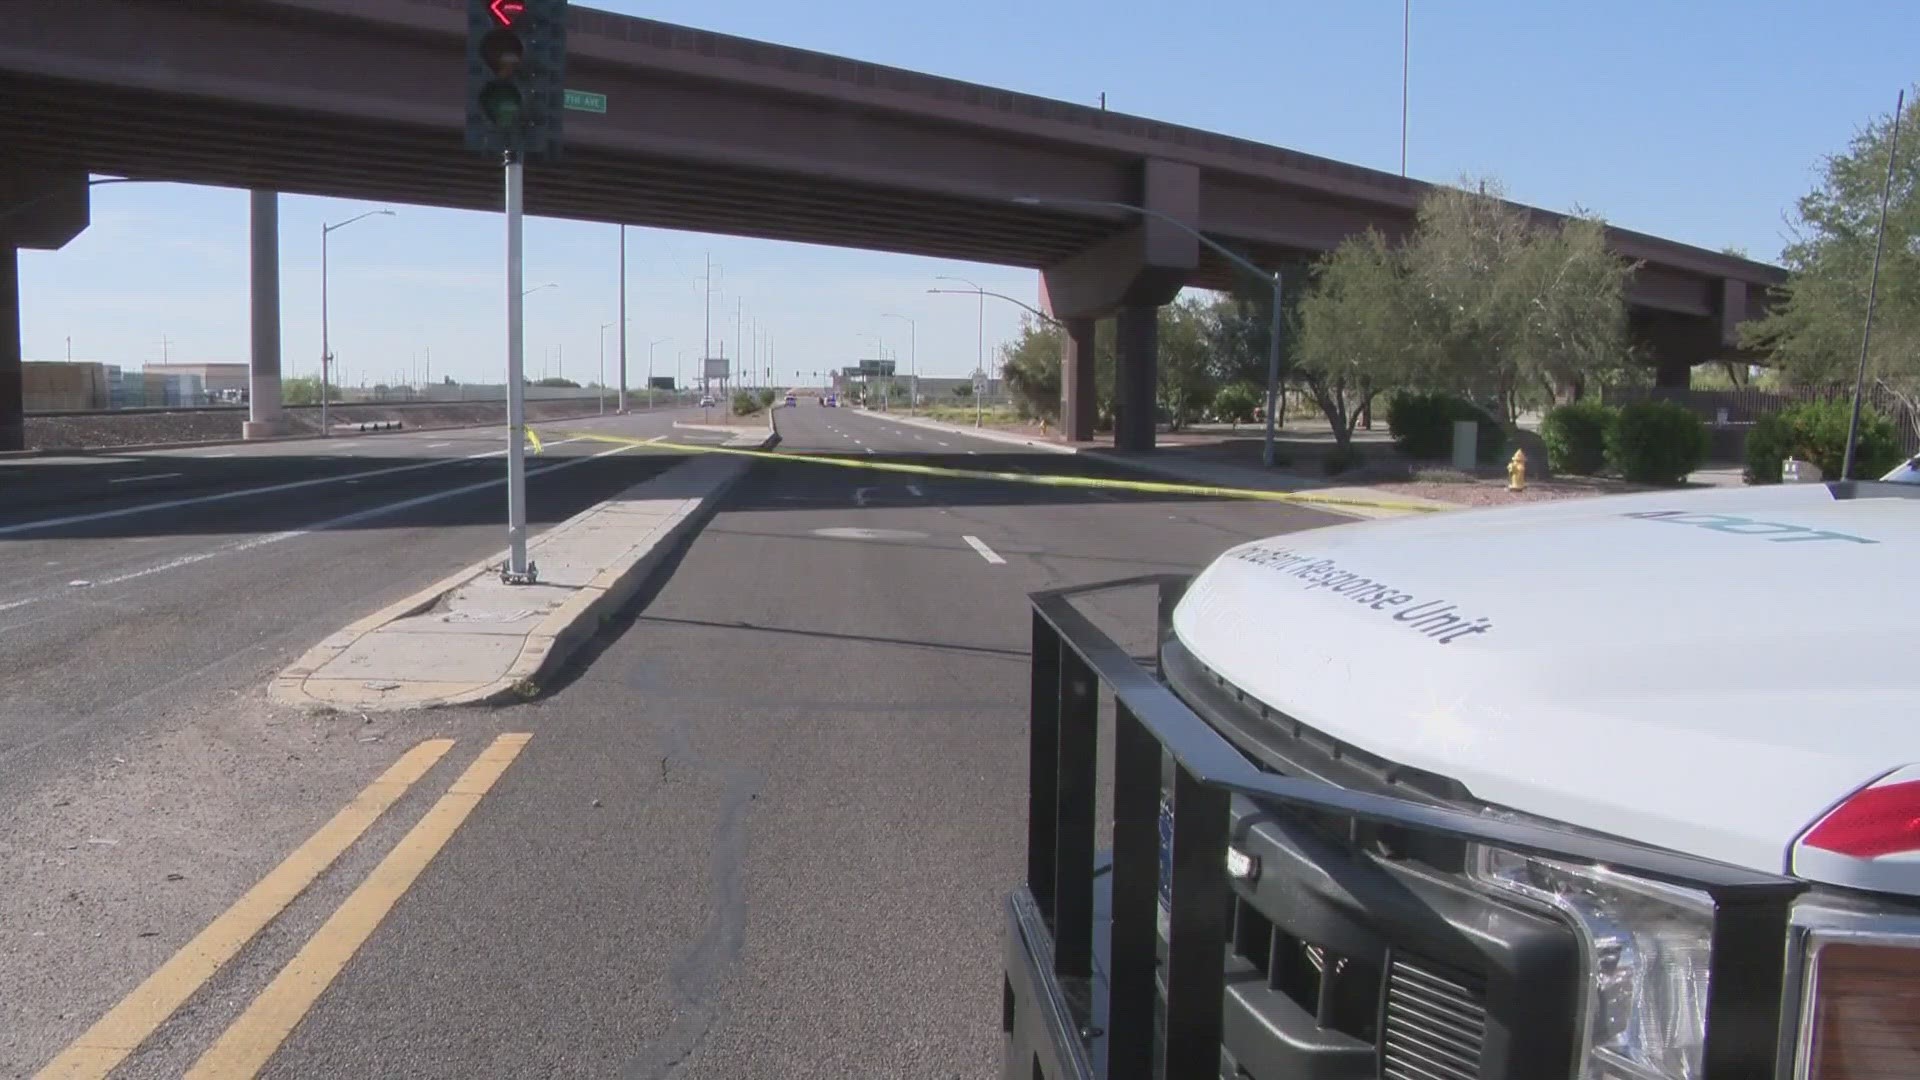 A motorcyclist was killed in a crash Saturday afternoon, according to Glendale police.